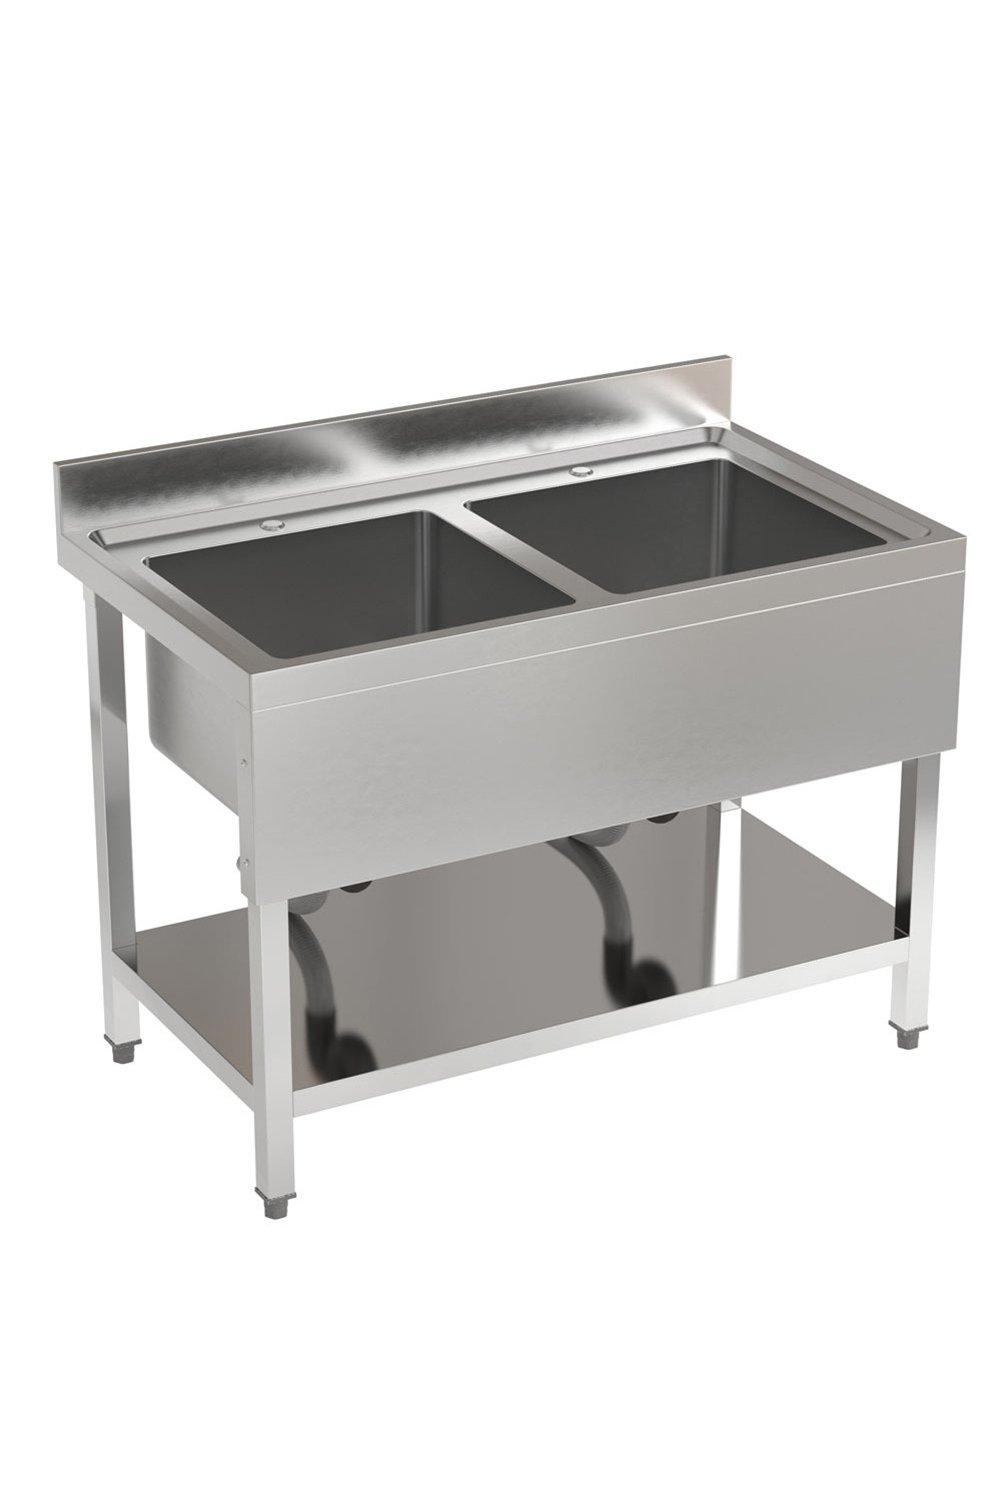 Two Compartment Stainless Steel Commercial Sink with Shelf